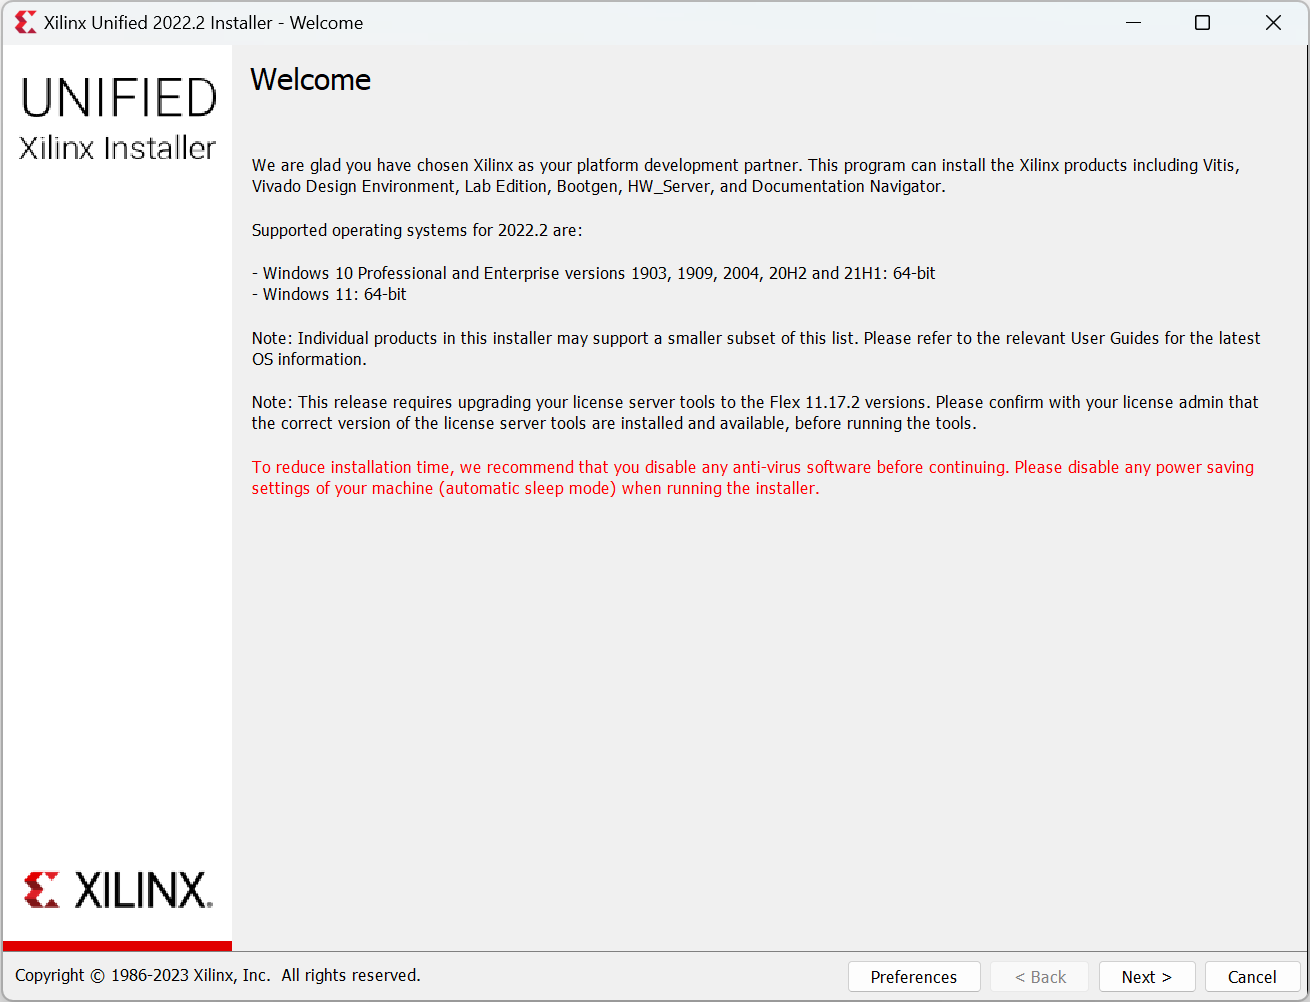 Xilinx Unified Installer Welcome Page Screenshot